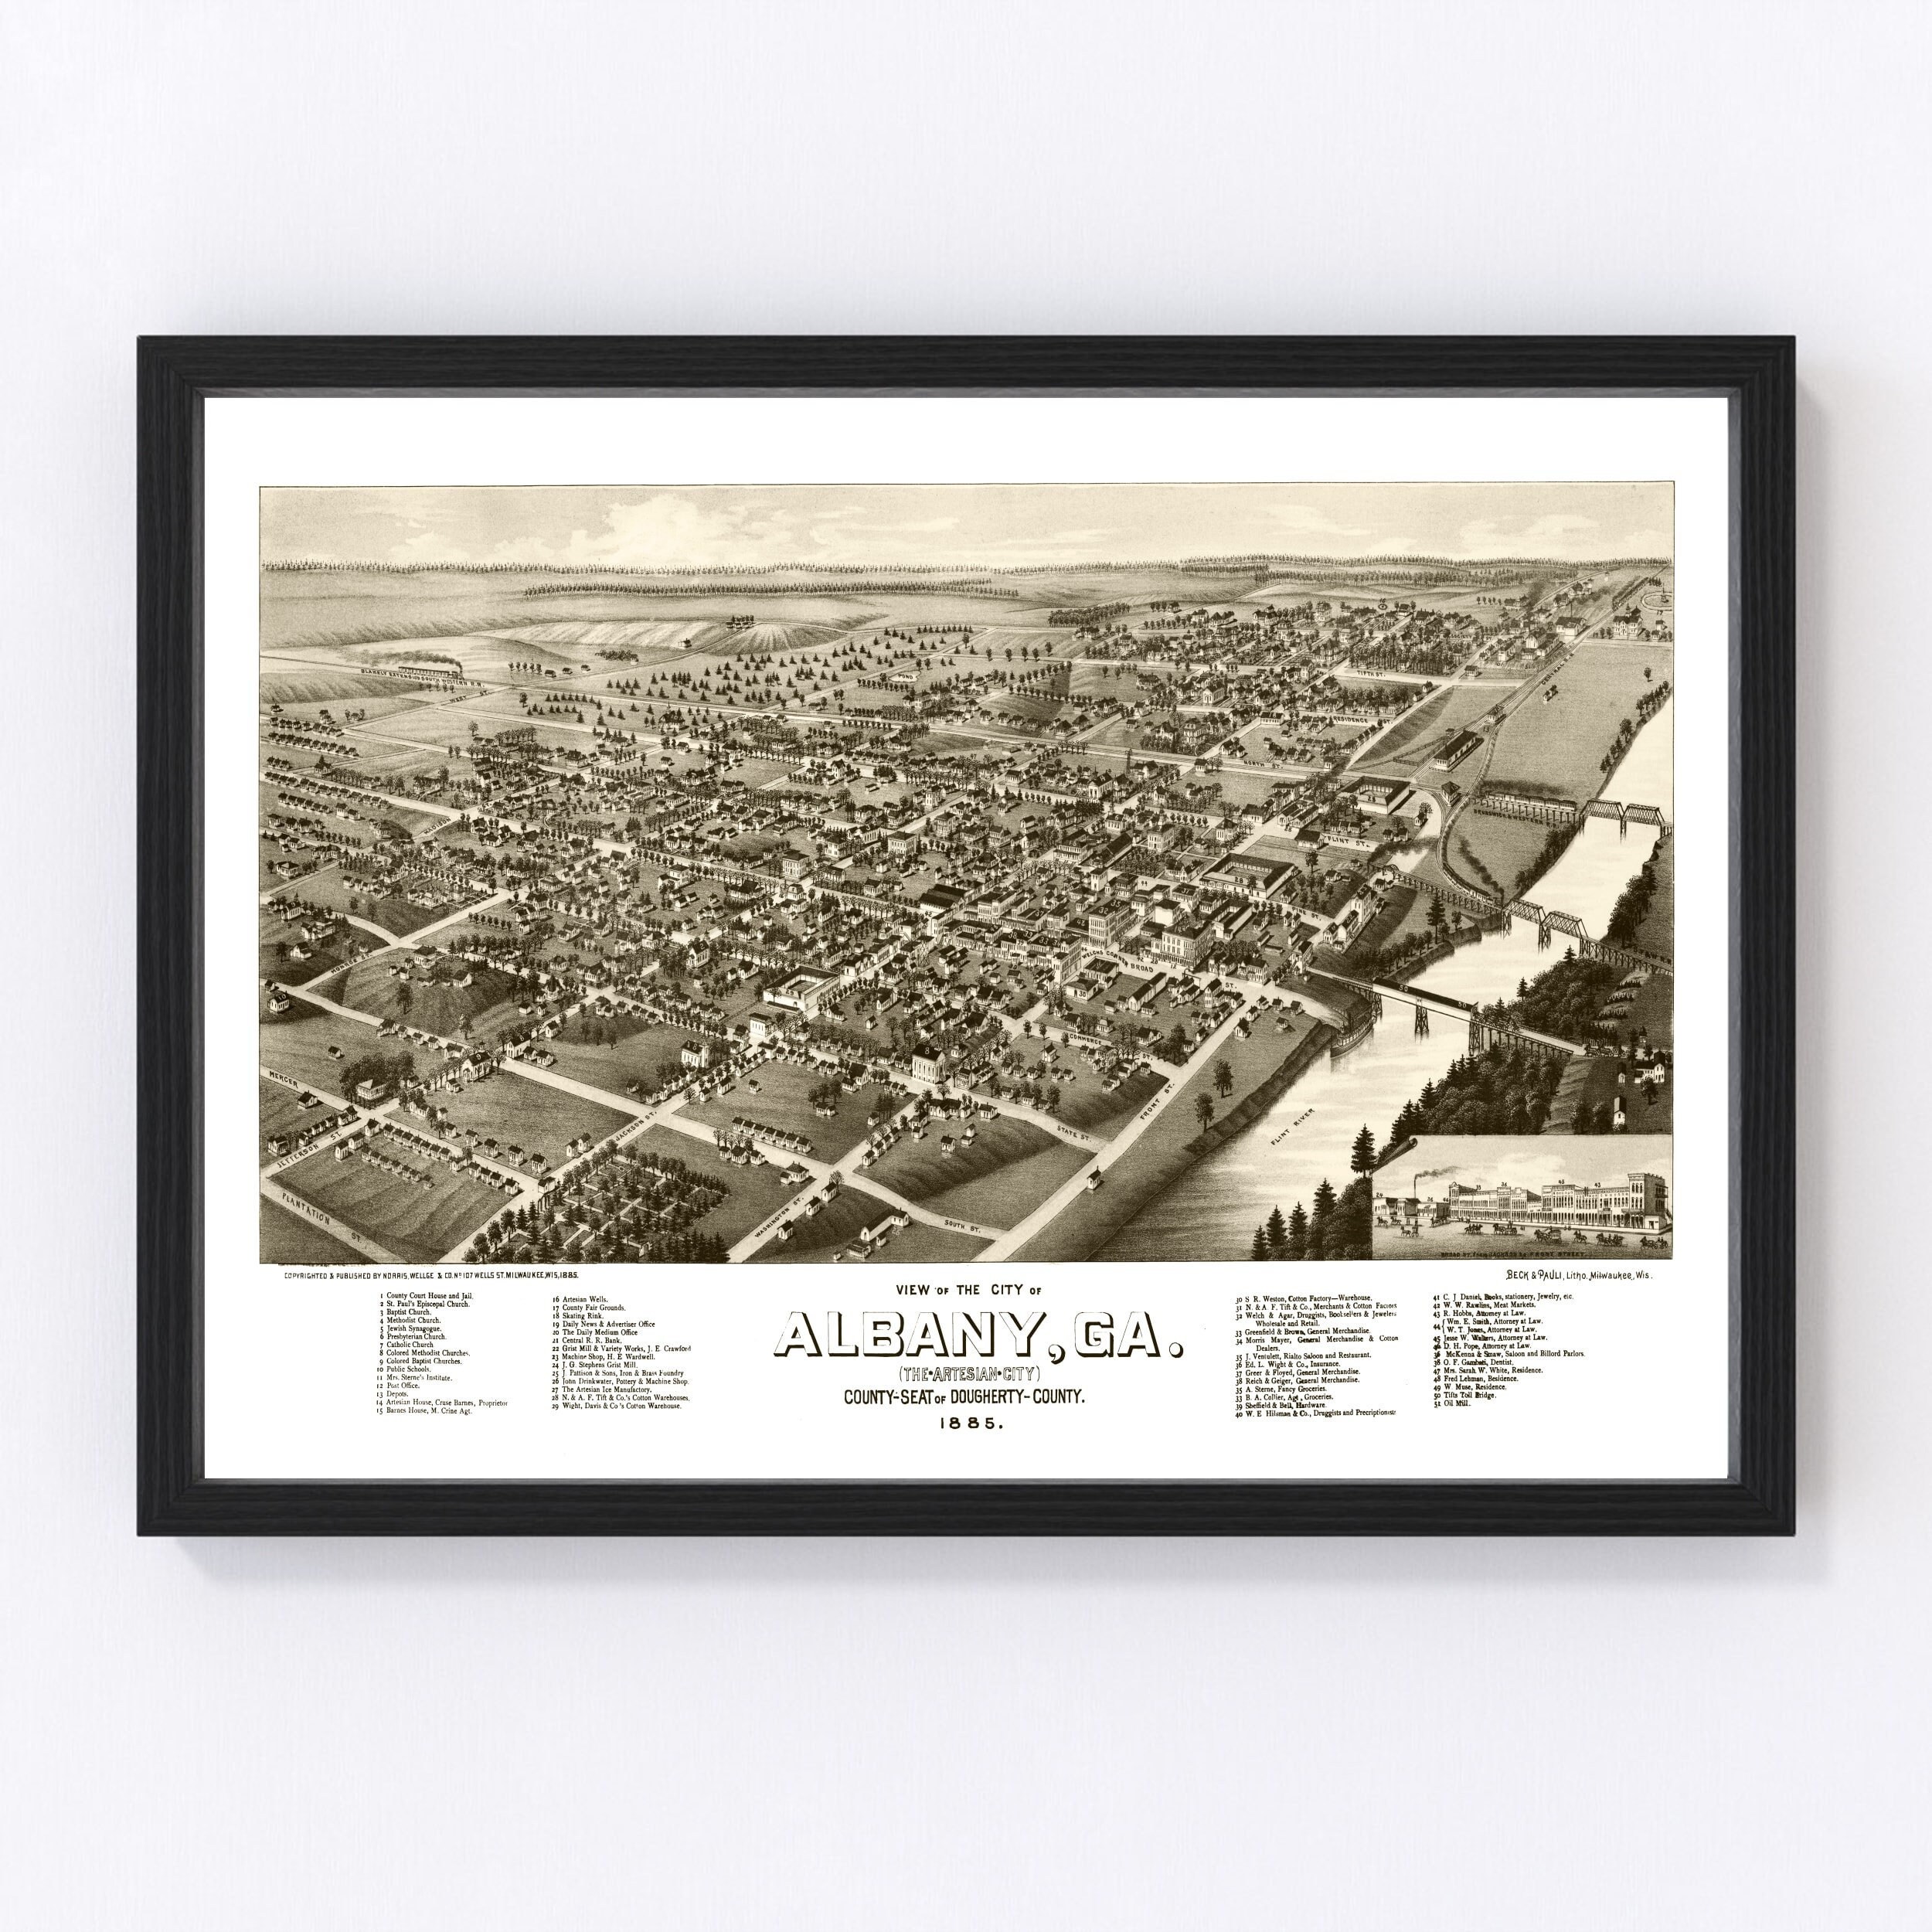 Albany Map 1885 Old Map of Albany Georgia Art Vintage Print Sex Image Hq